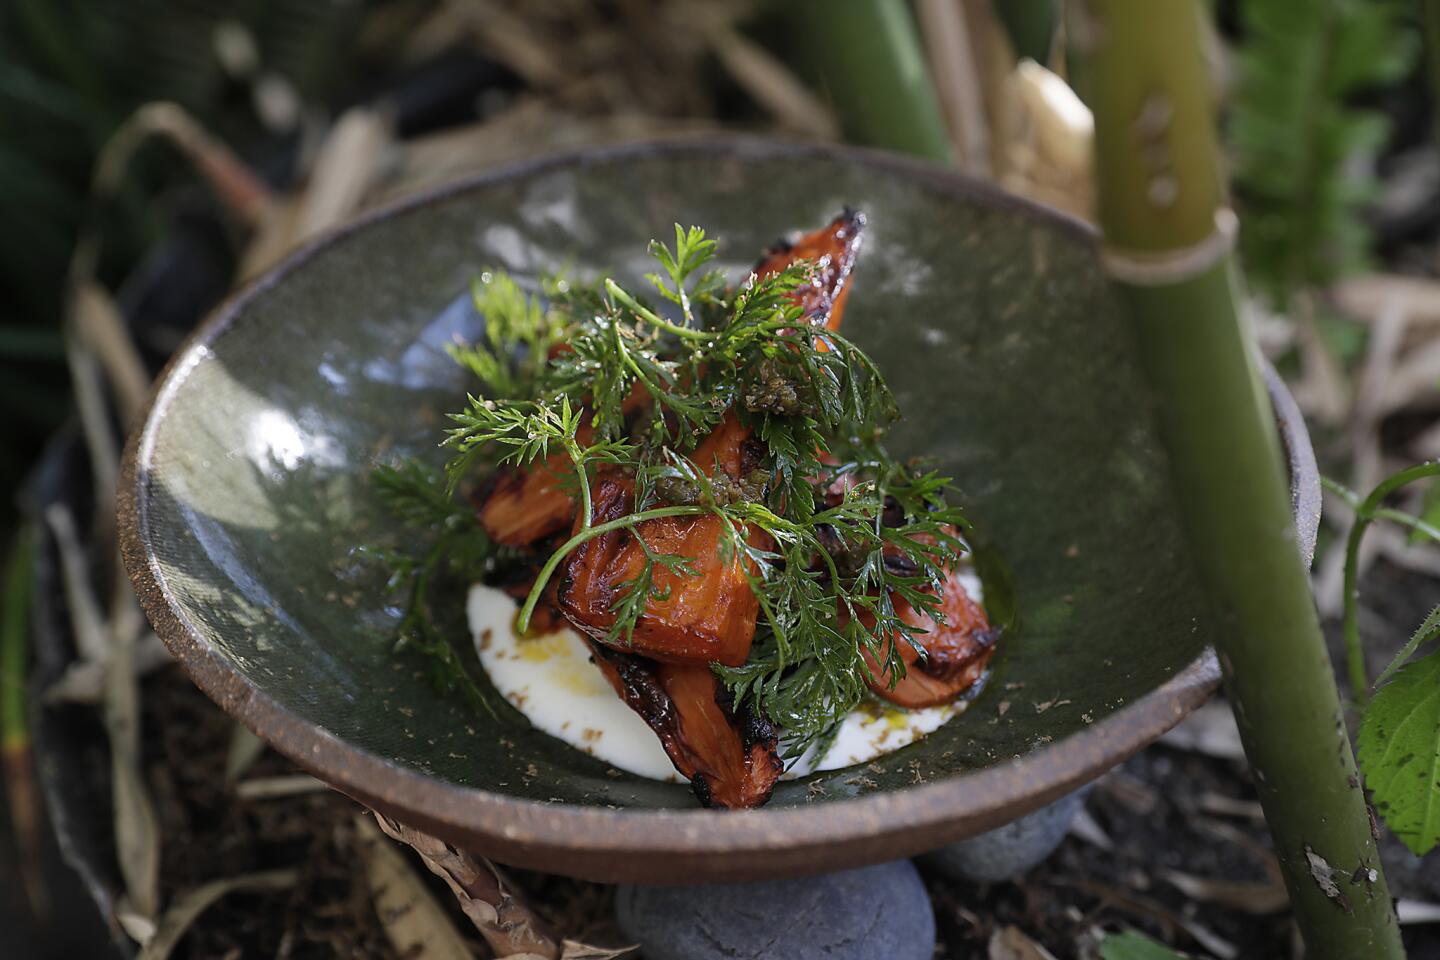 New L.A. restaurant: The Hearth & Hound from April Bloomfield and Ken Friedman